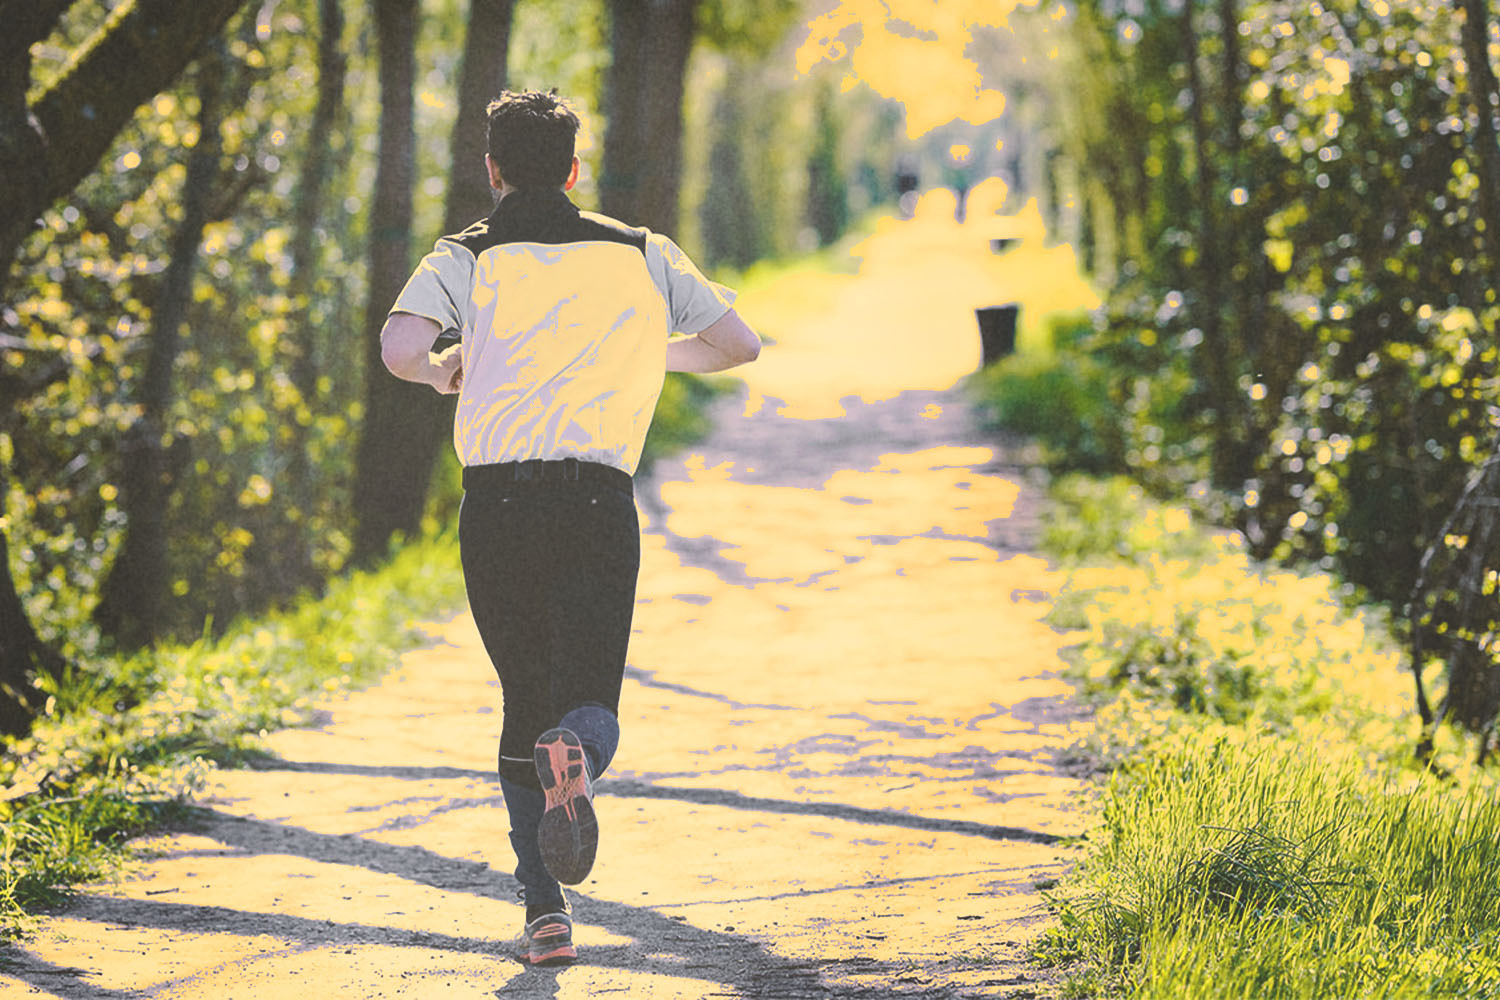 15 Benefits of Running That Will Make You Want to Log Some Miles